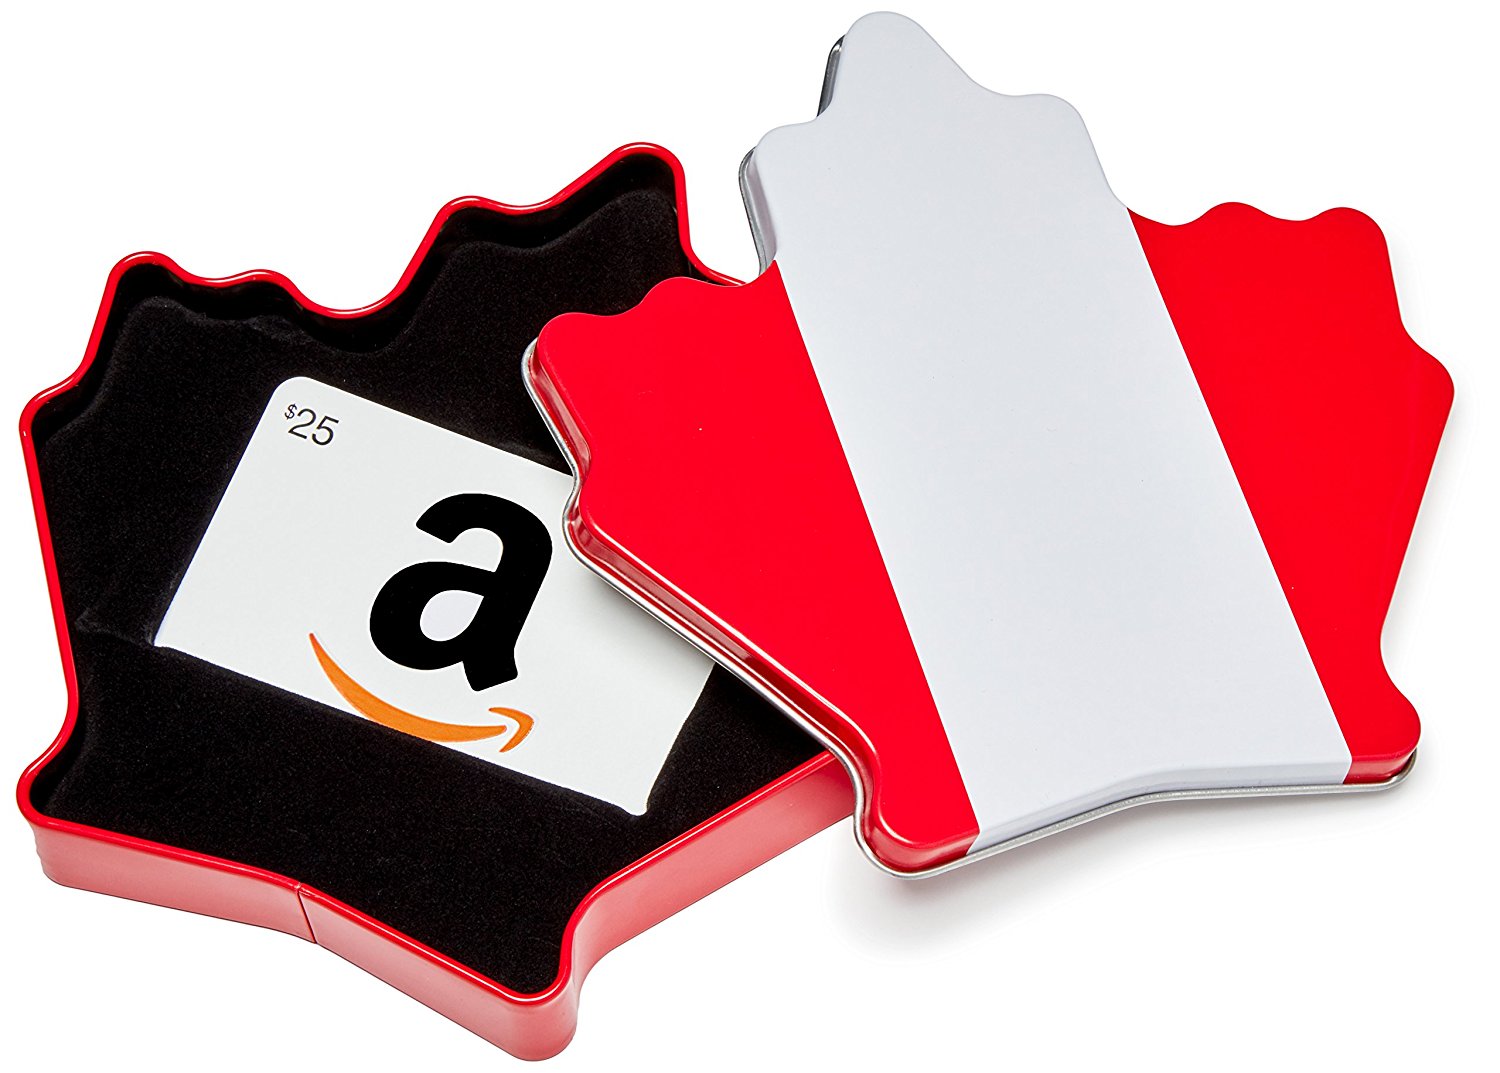 Amazon Prime Day Deals: Buy a $25 Amazon.ca Gift Card & Get A $5 Credit